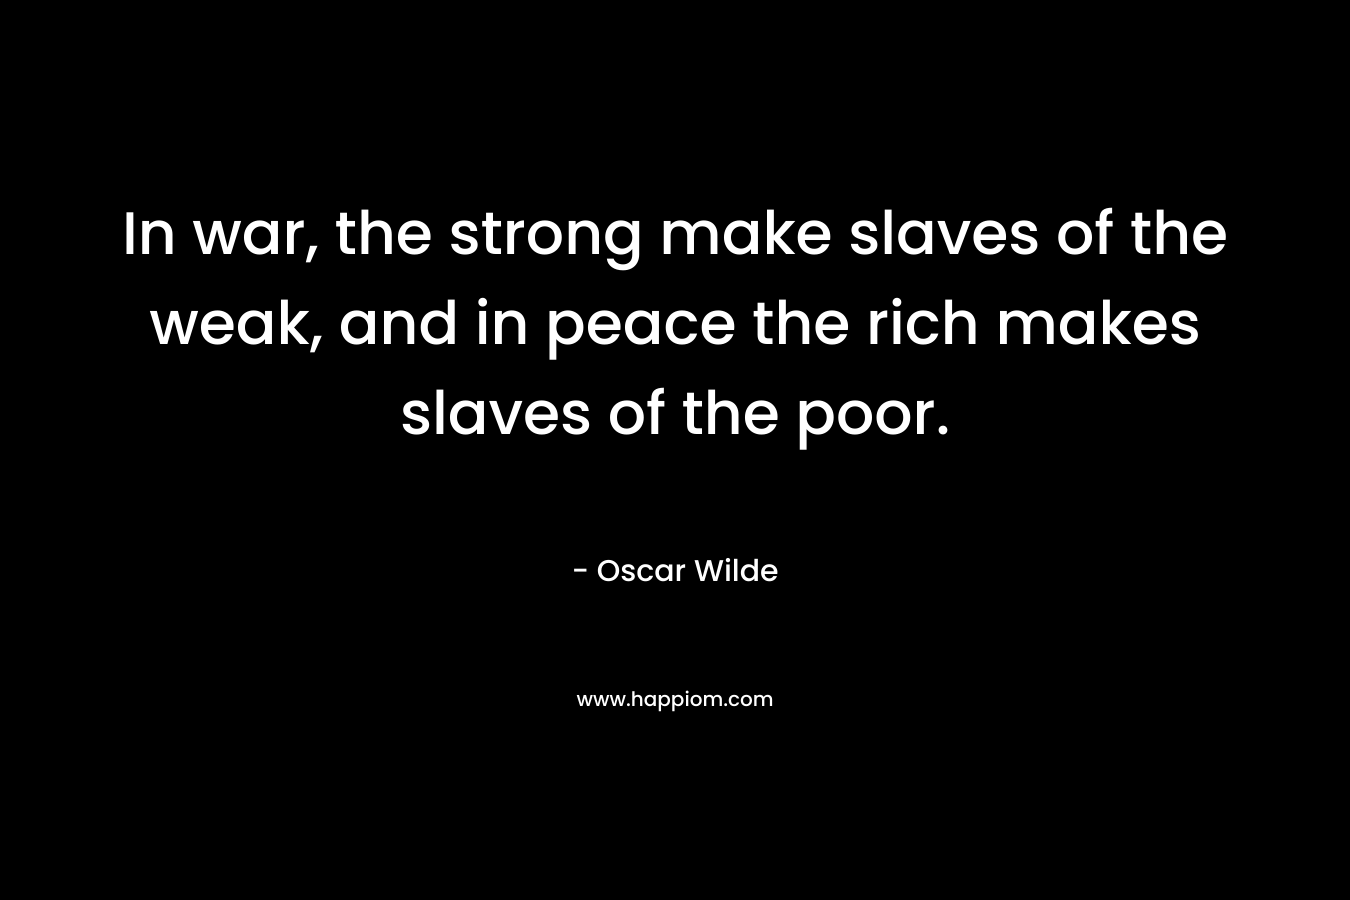 In war, the strong make slaves of the weak, and in peace the rich makes slaves of the poor.